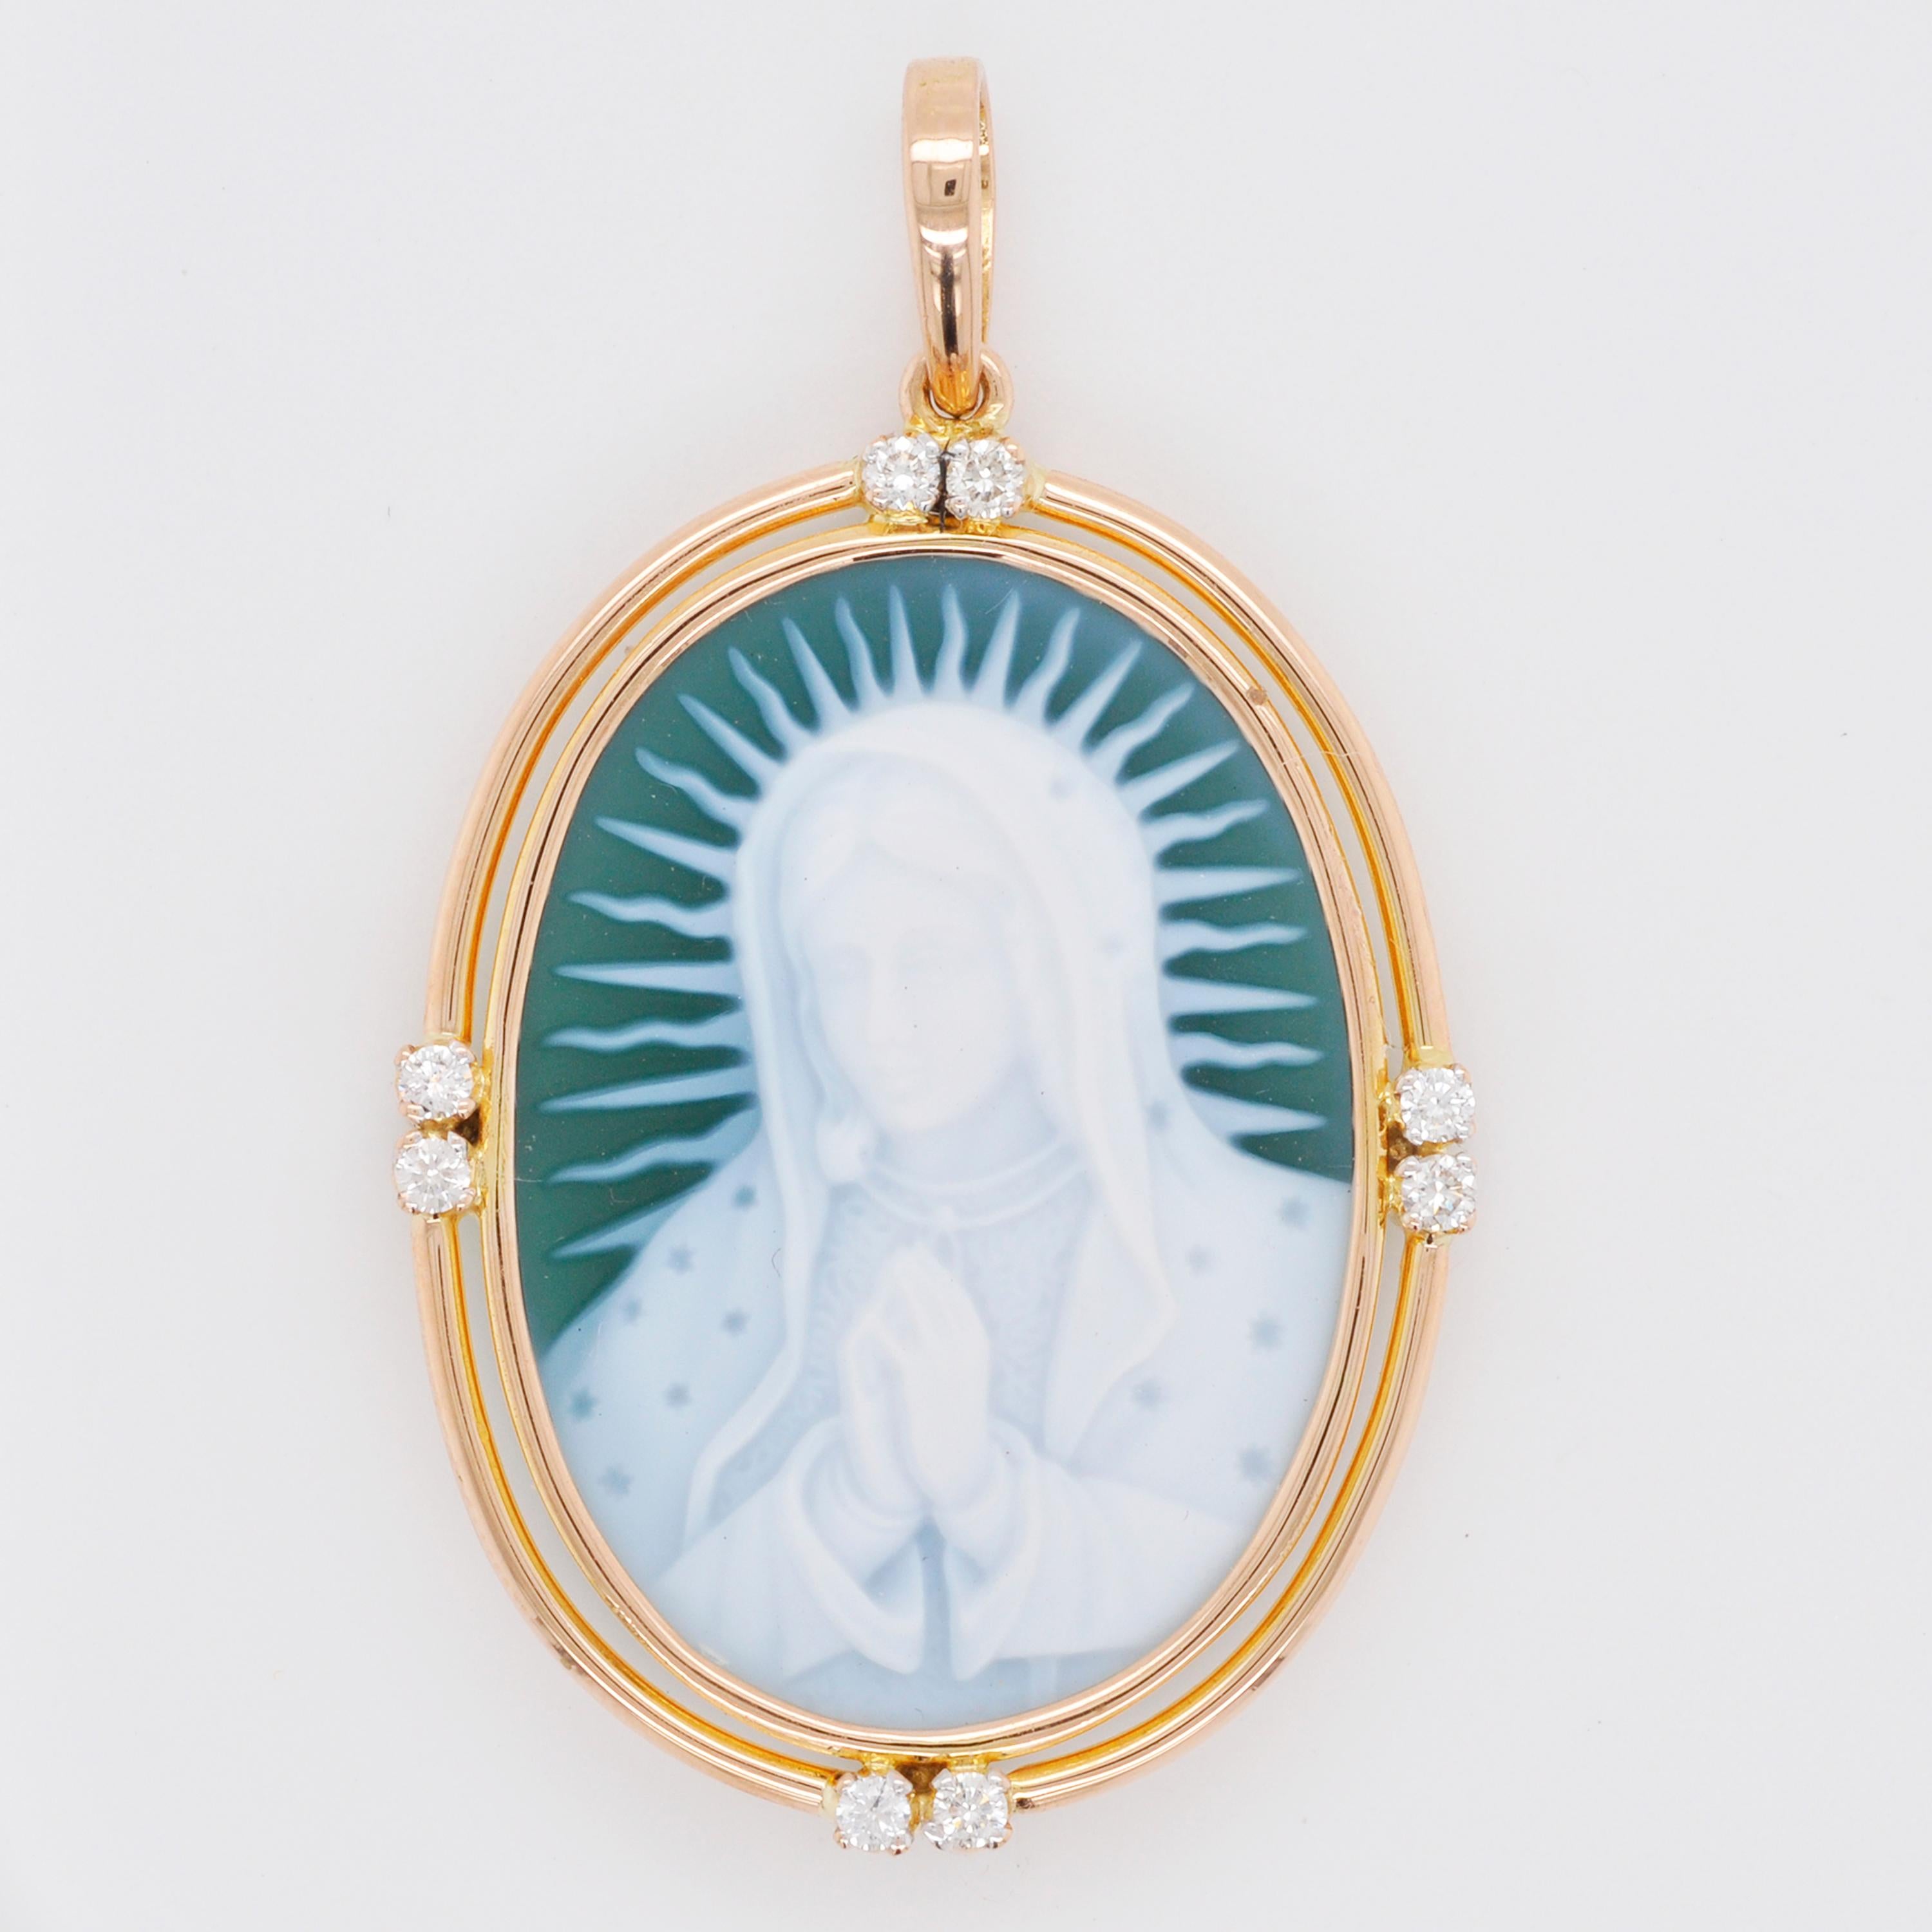 18 karat gold Mother Mary agate carving cameo diamond pendant necklace

This Virgin Mother Mary agate carving cameo pendant set in a simple 18 karat (18K) yellow gold collet, with a double gold rim accentuated by a pair of diamonds on all four